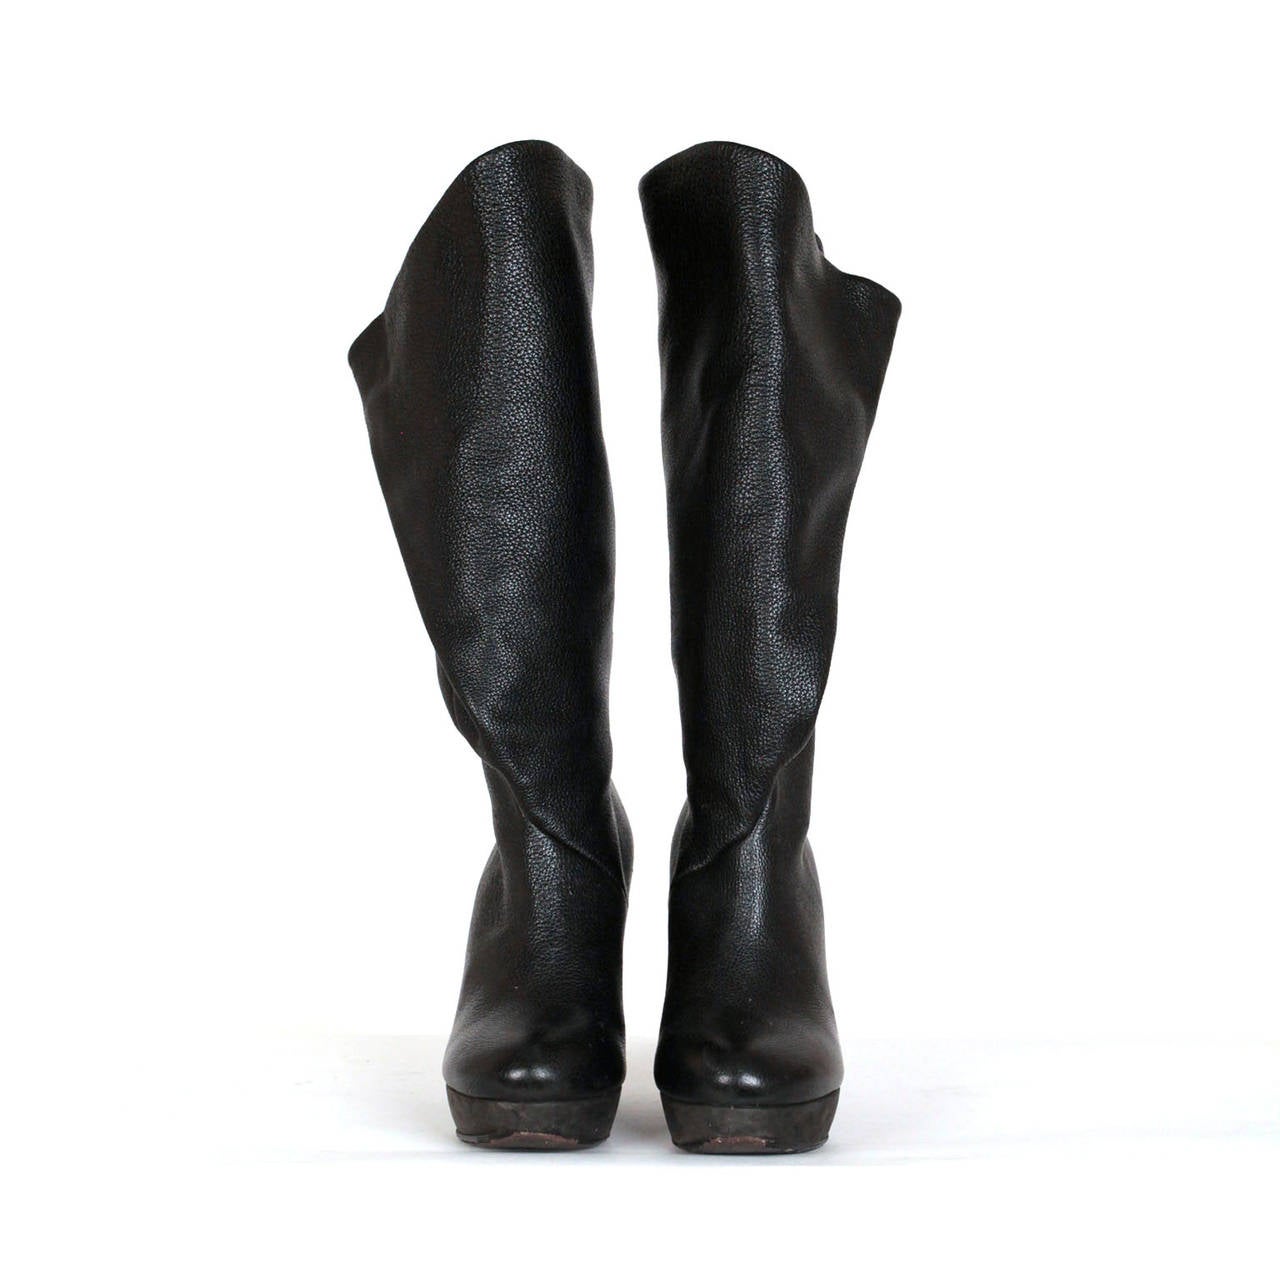 Balenciaga by Nicolas Ghesquière Plateau boots. Boots are black pebble leather, with fold detail at upper back side. Boots come just below knee and can be worn in a few options, snap detail for closure and have soft suede covering the plateau. Made